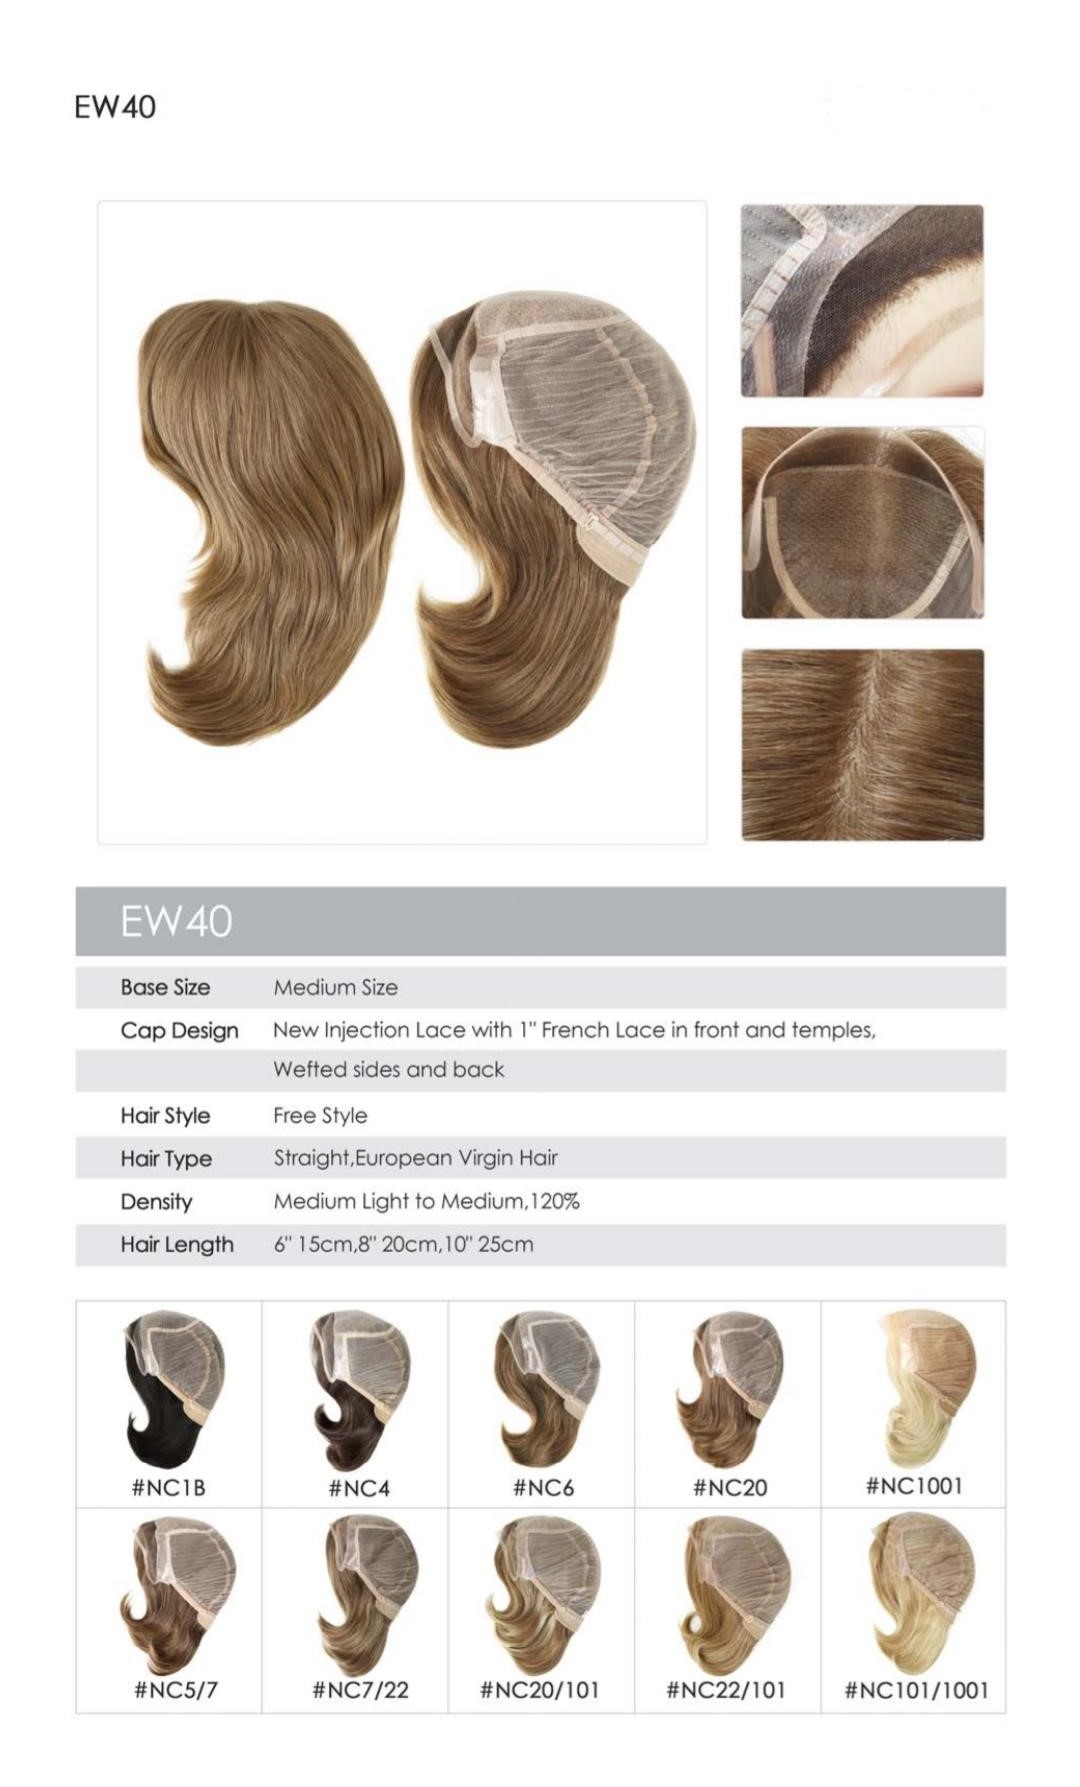 Woman's Topper EW40 Hair length 6" 8" and 10"